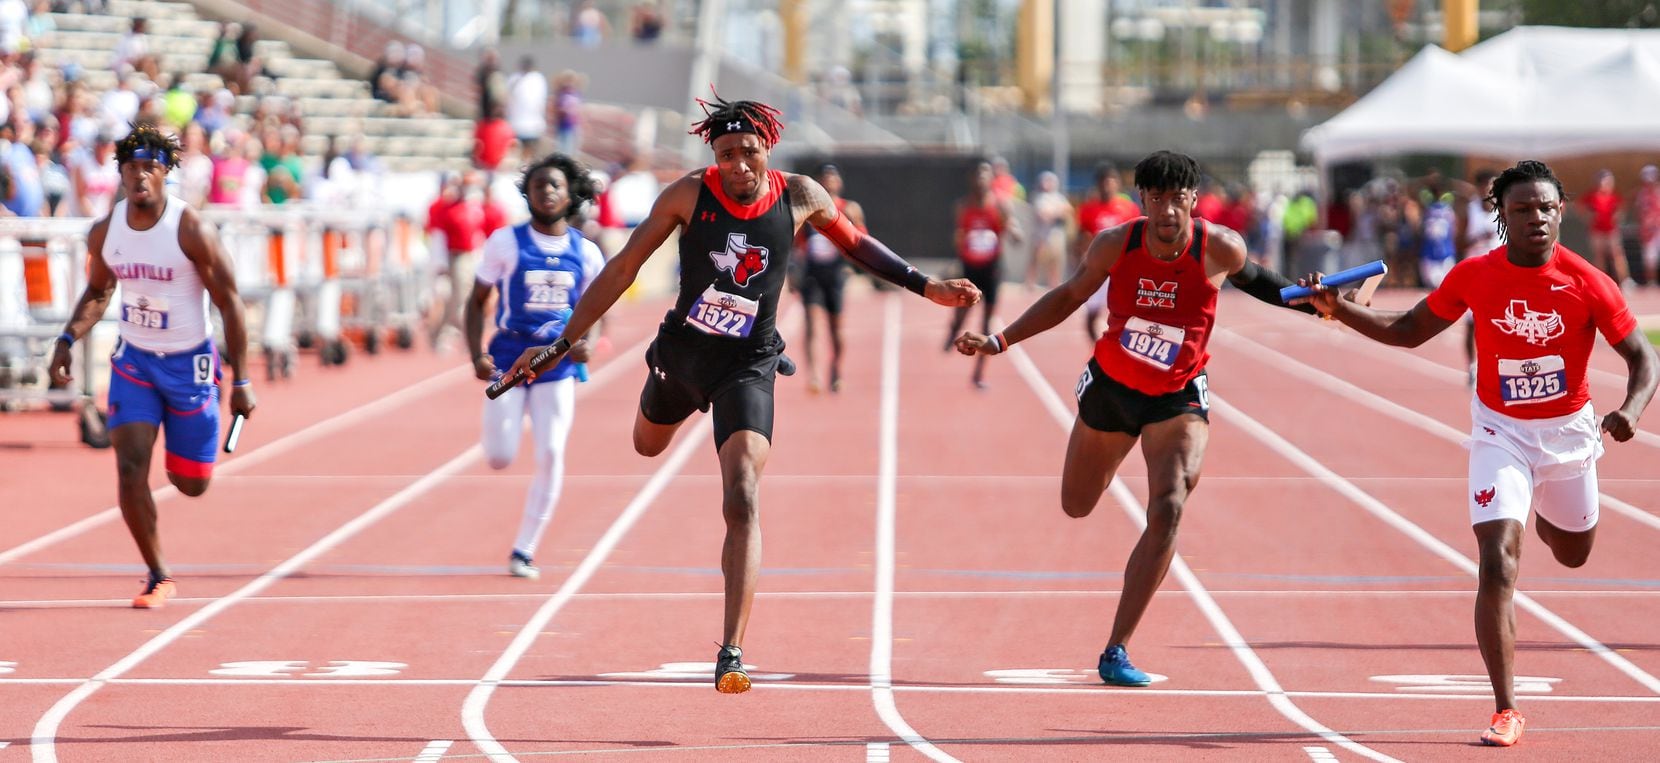 Dacorey Ware of Cedar Hill crosses the finish line in first place the 6A Boys 4x100 meter...